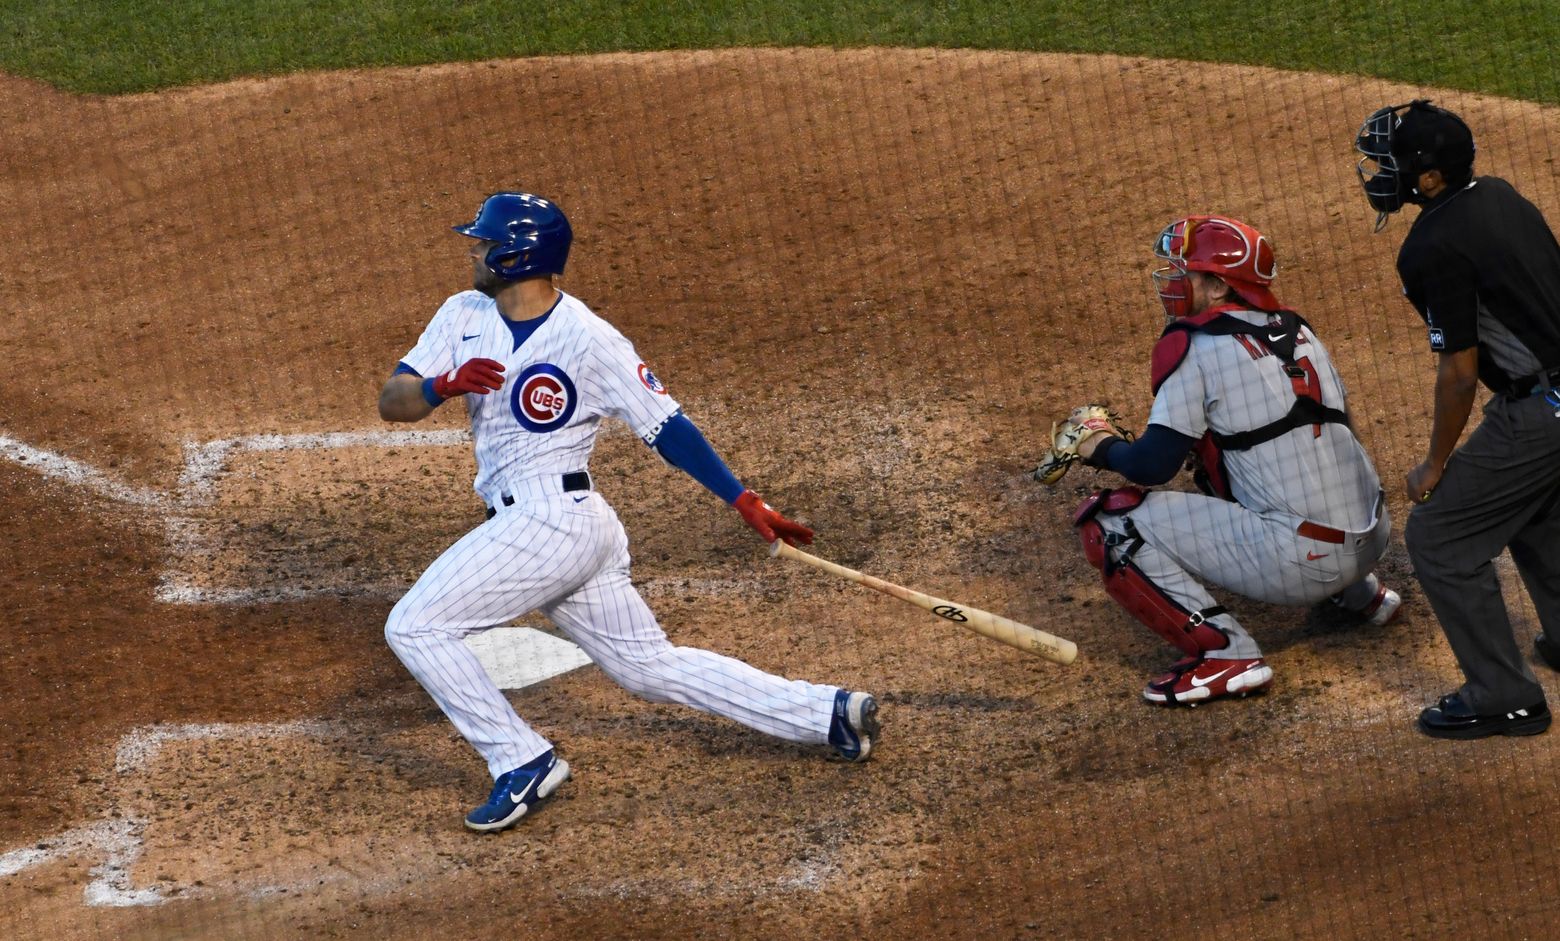 Bote's 2-run single pushes Cubs to 4-2 win, split with Cards